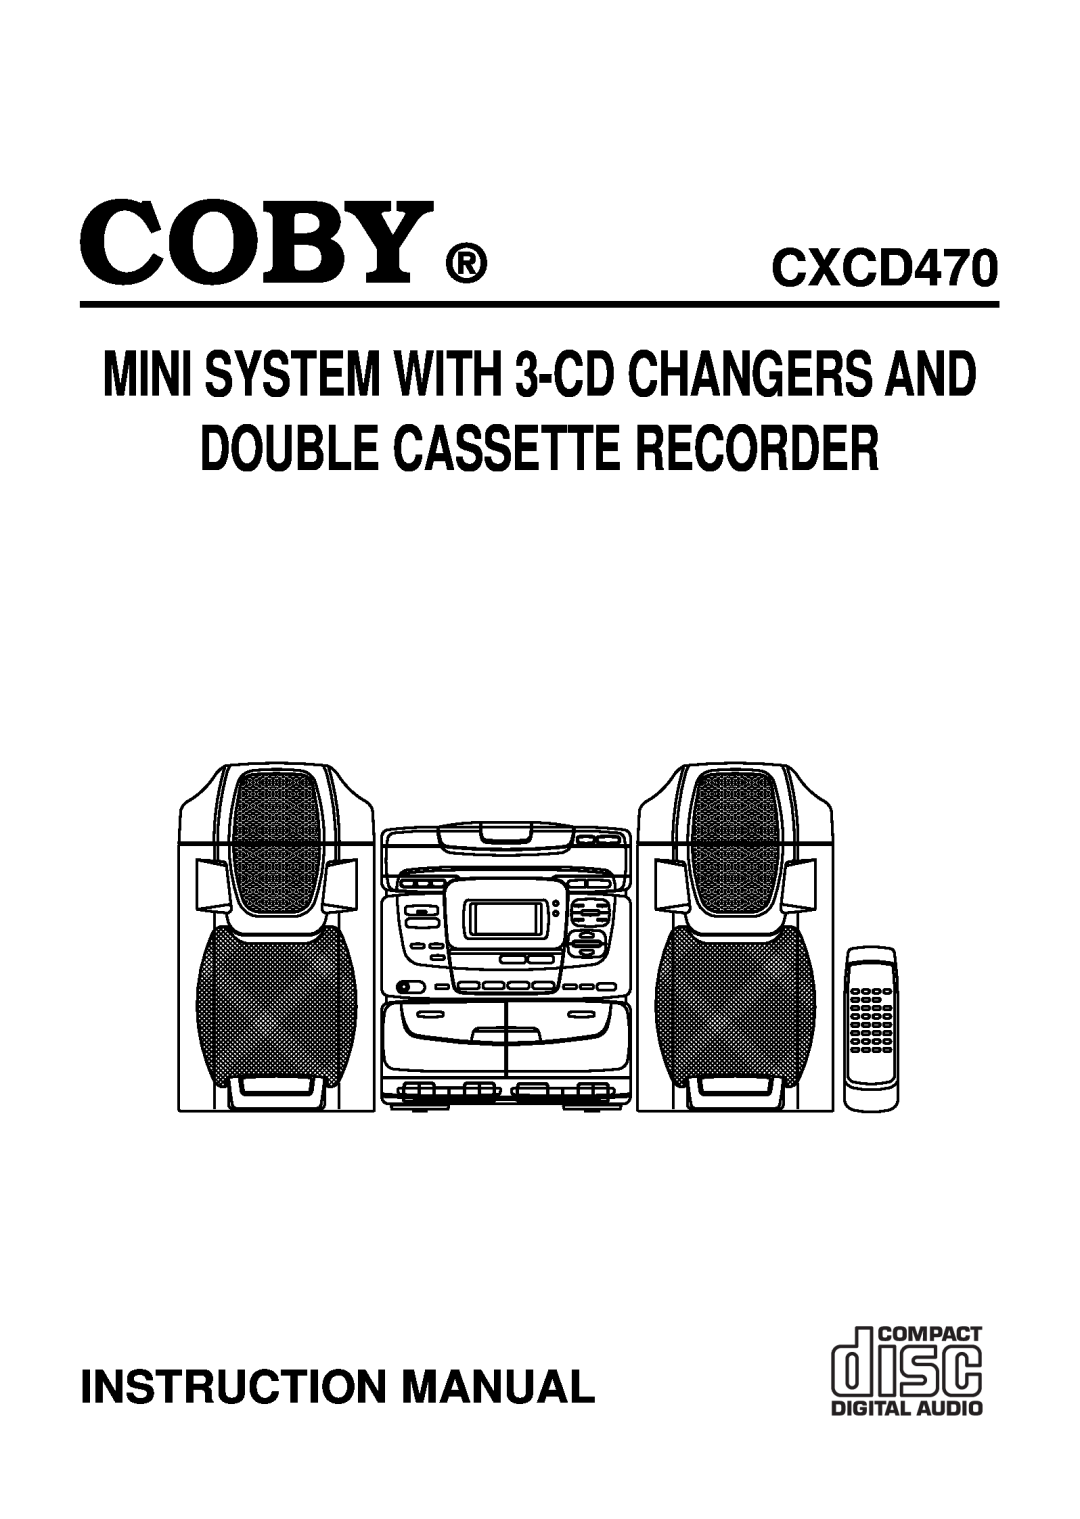 COBY electronic CXCD470 instruction manual Double Cassette Recorder, MINI SYSTEM WITH 3-CDCHANGERS AND 